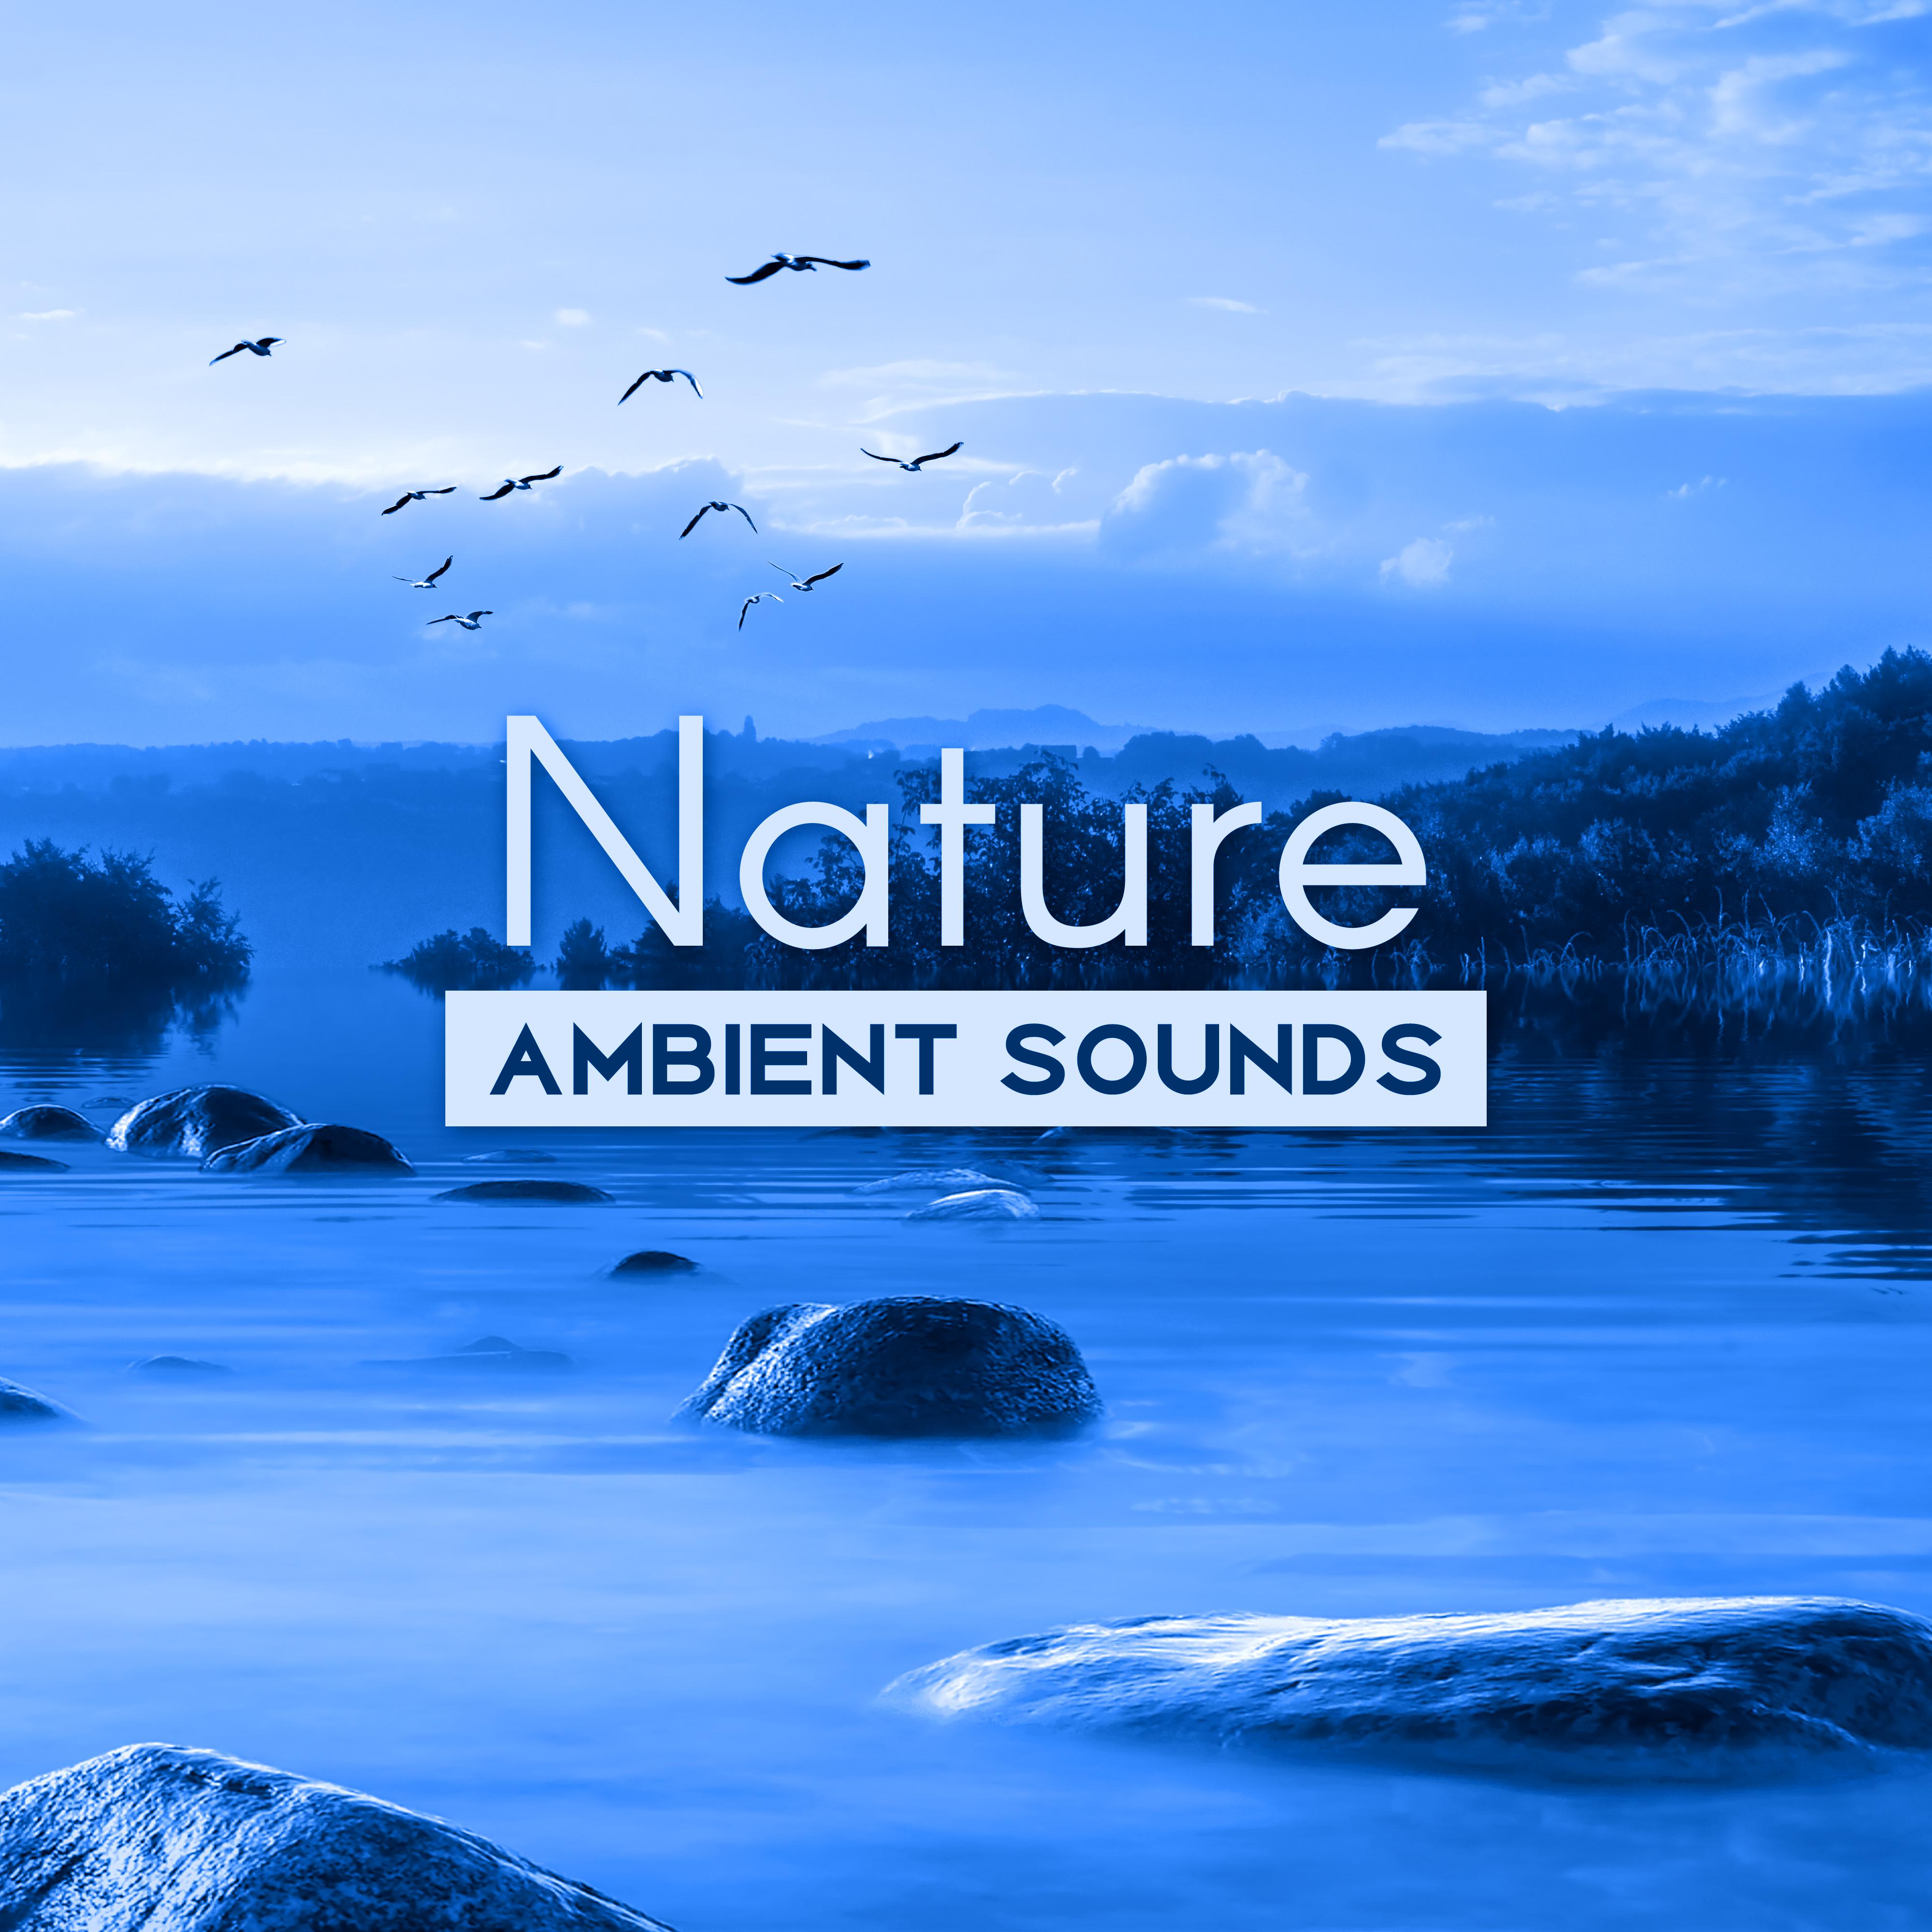 Nature Ambient Sounds – Calm Sounds to Relax, Nature Relaxation, New Age Music to Rest, Healing Sounds, Therapy with Music